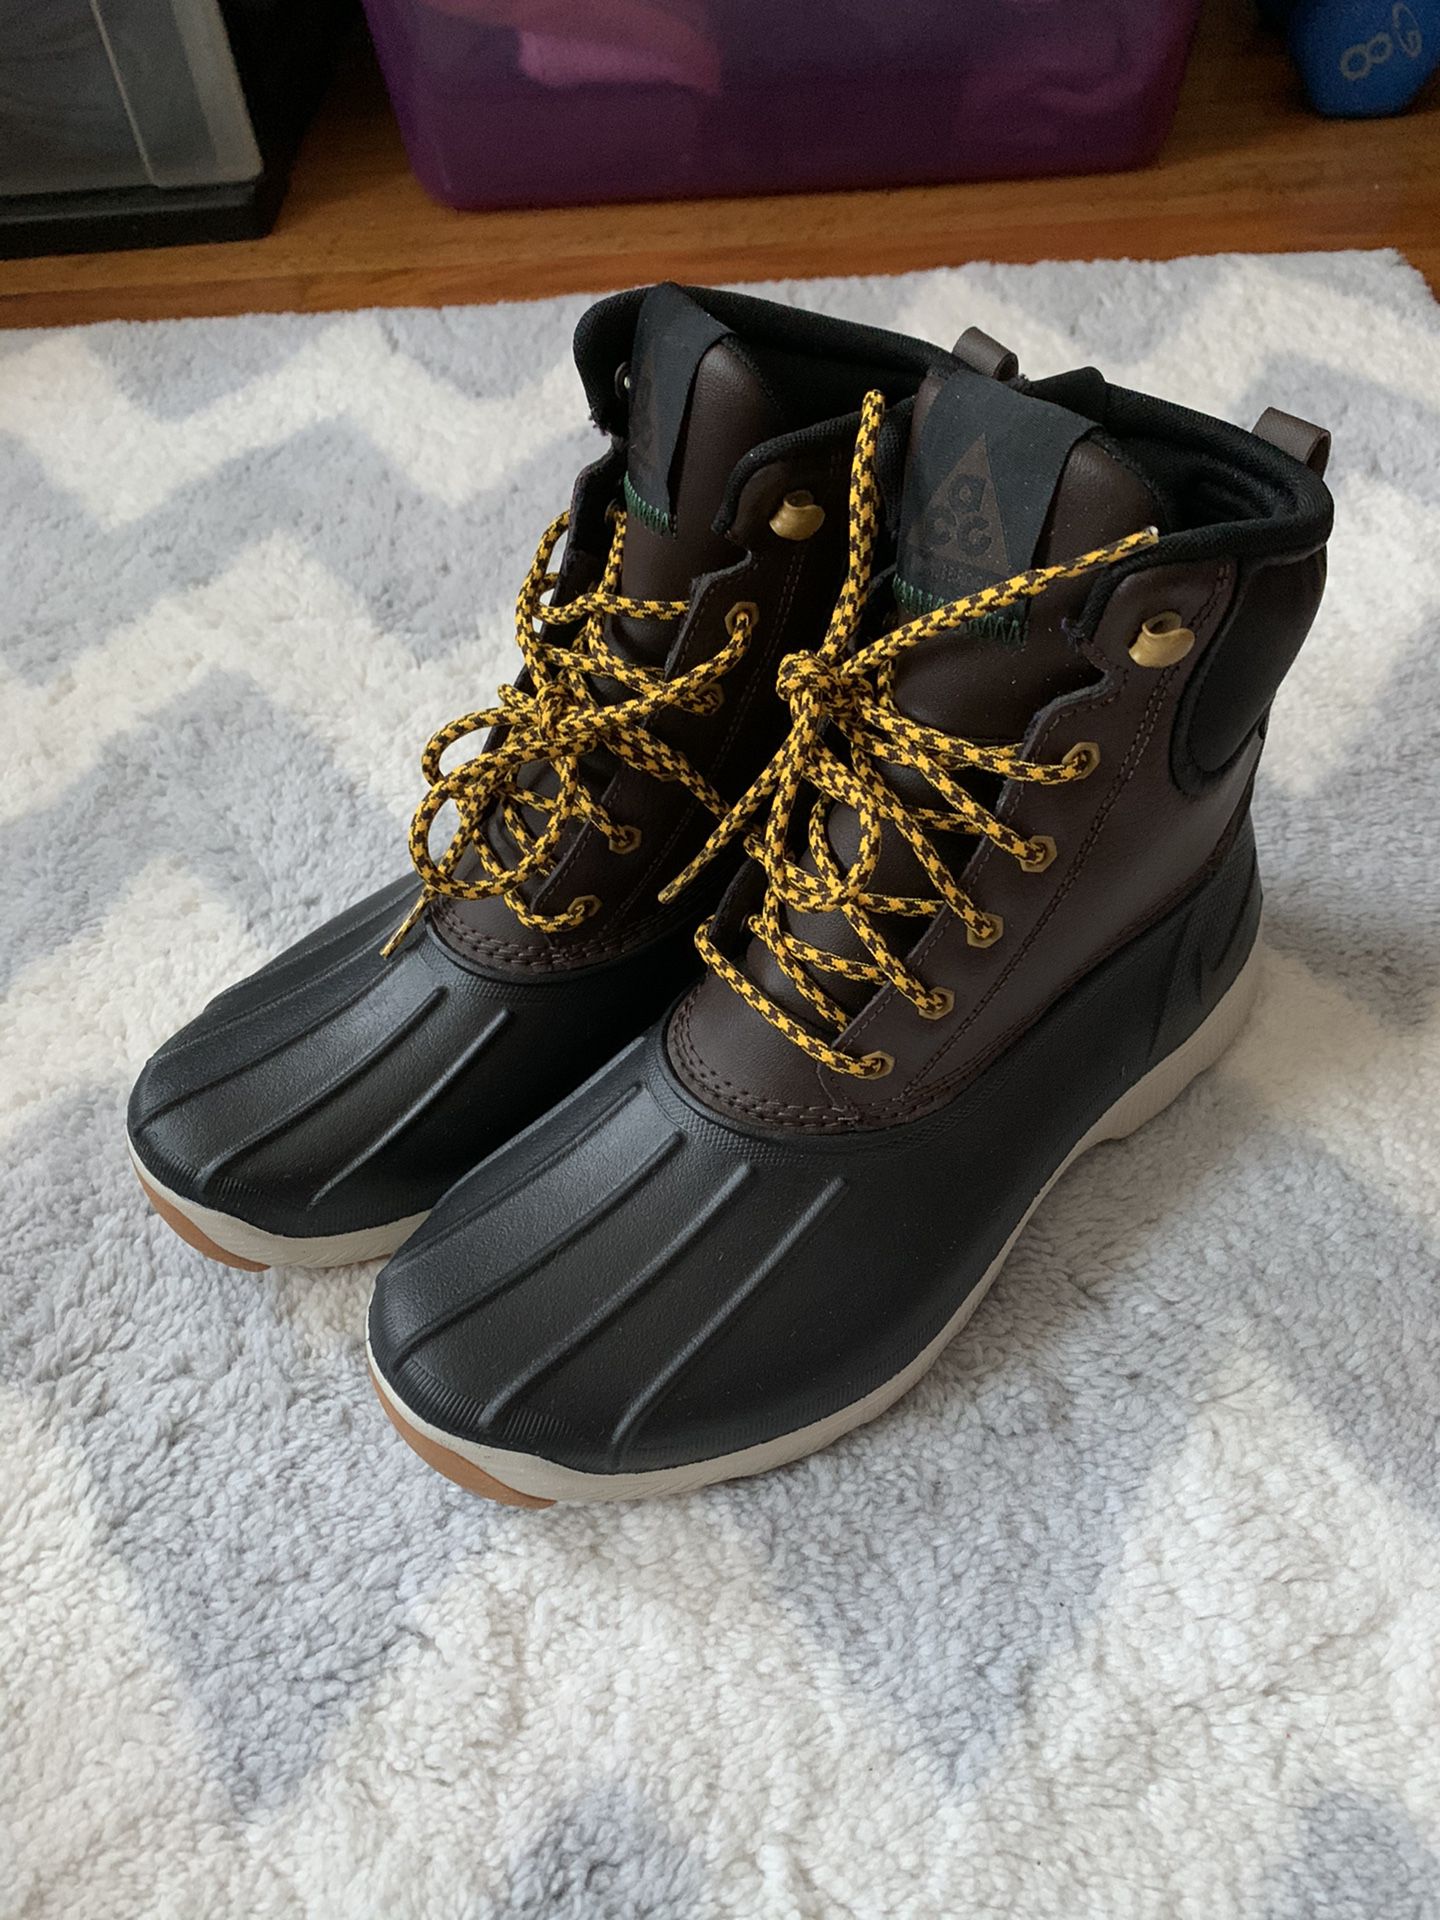 Nike ACG Solarsoft Ripplebrook Boots Size 8 (Great for Rain and Snow)